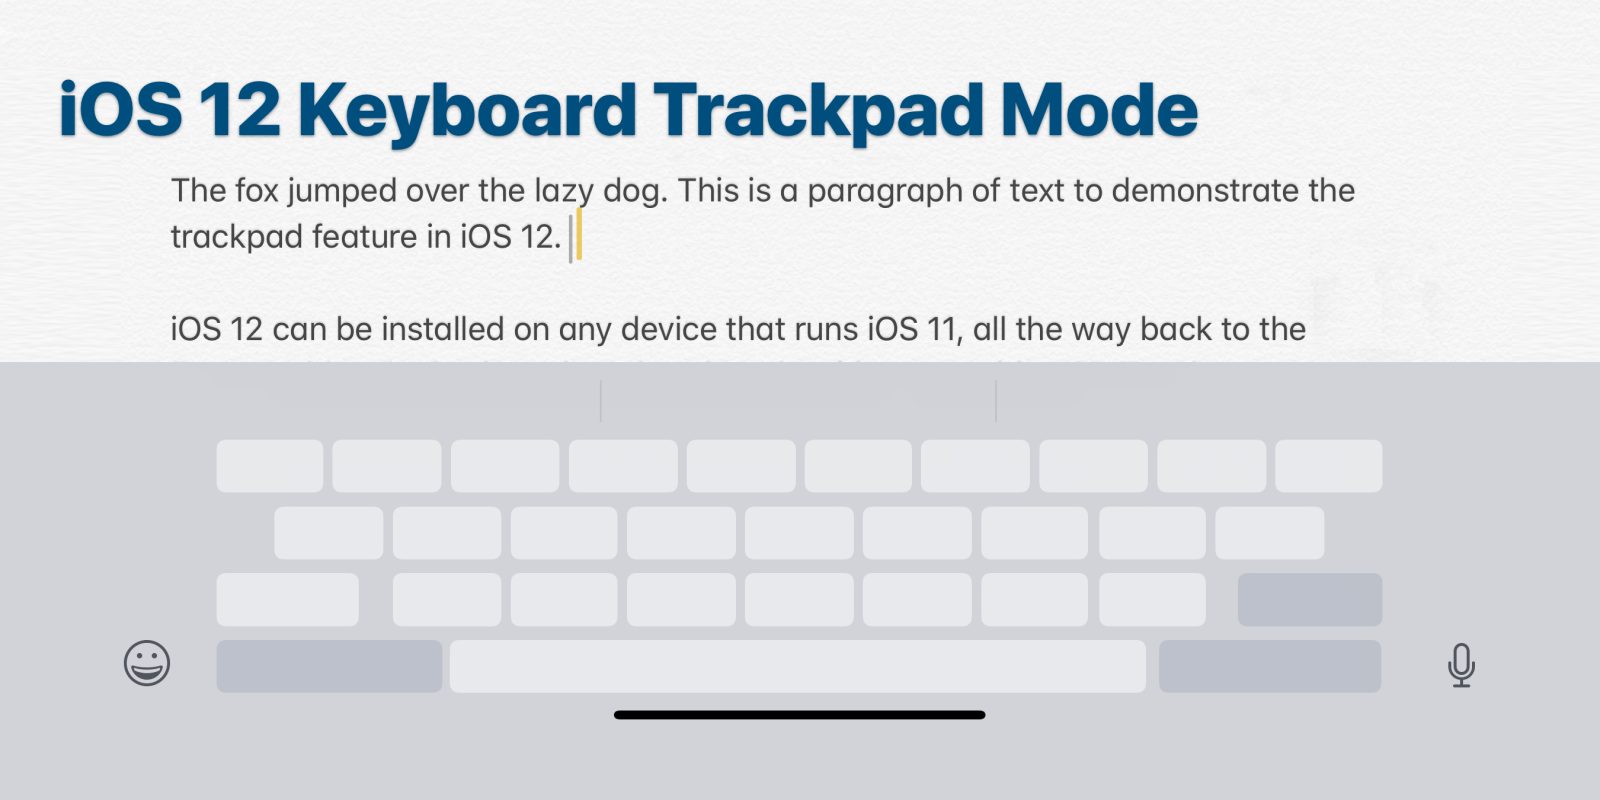 tøve komfortabel tyve How to use keyboard trackpad mode on every iPhone and iPad with iOS 12 -  9to5Mac